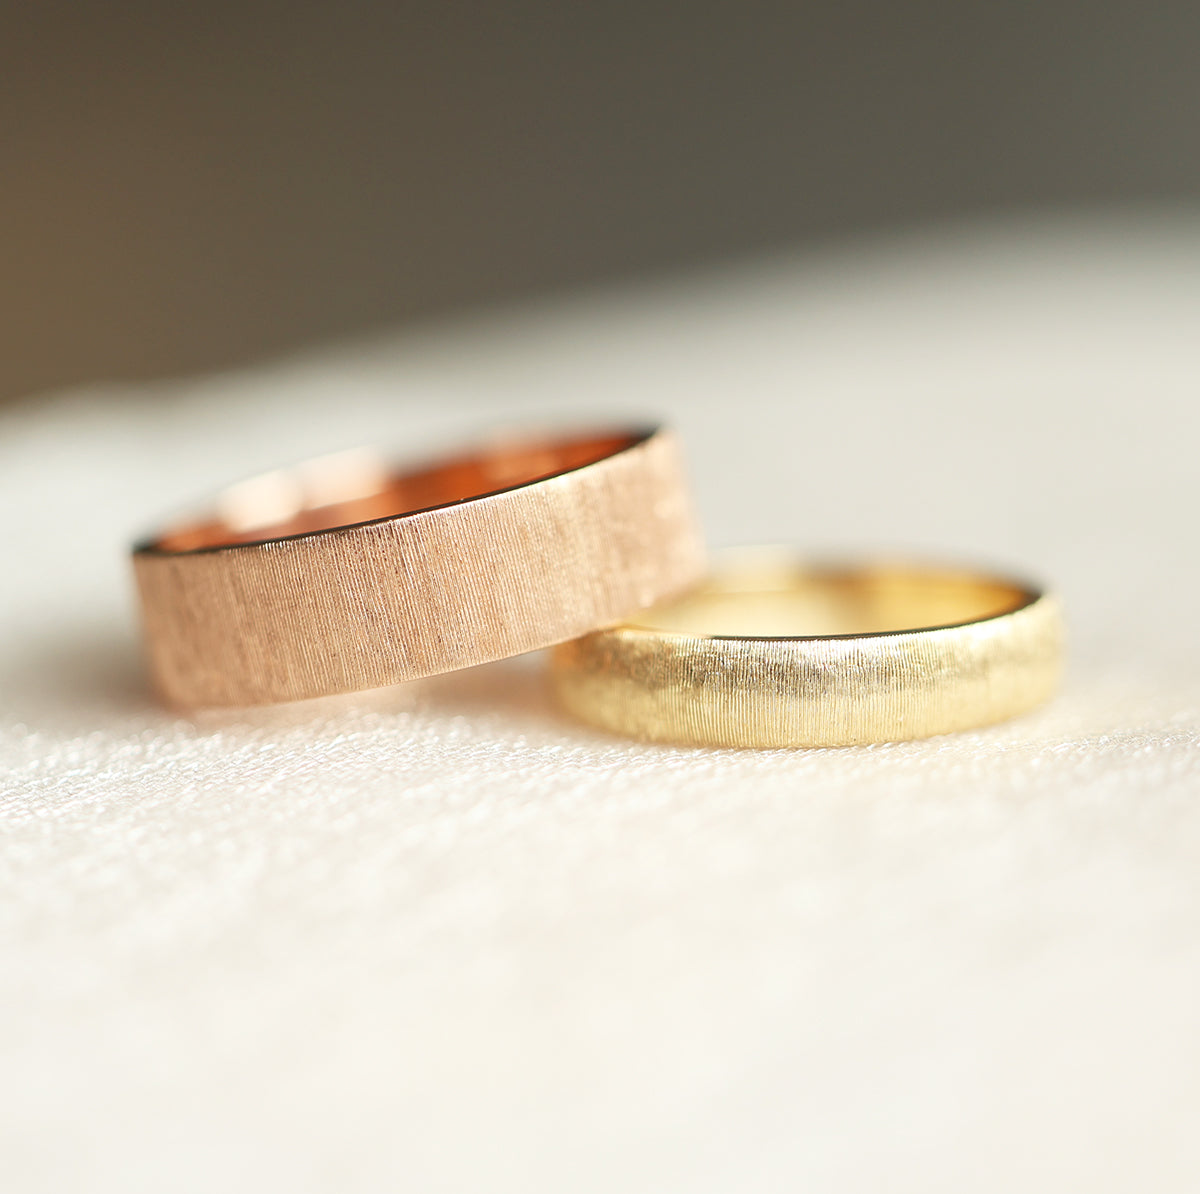 June Brushed 4mm Gold Wedding Band, Unisex Wedding Ring For Him And Her With Silk Like Finish-Capucinne